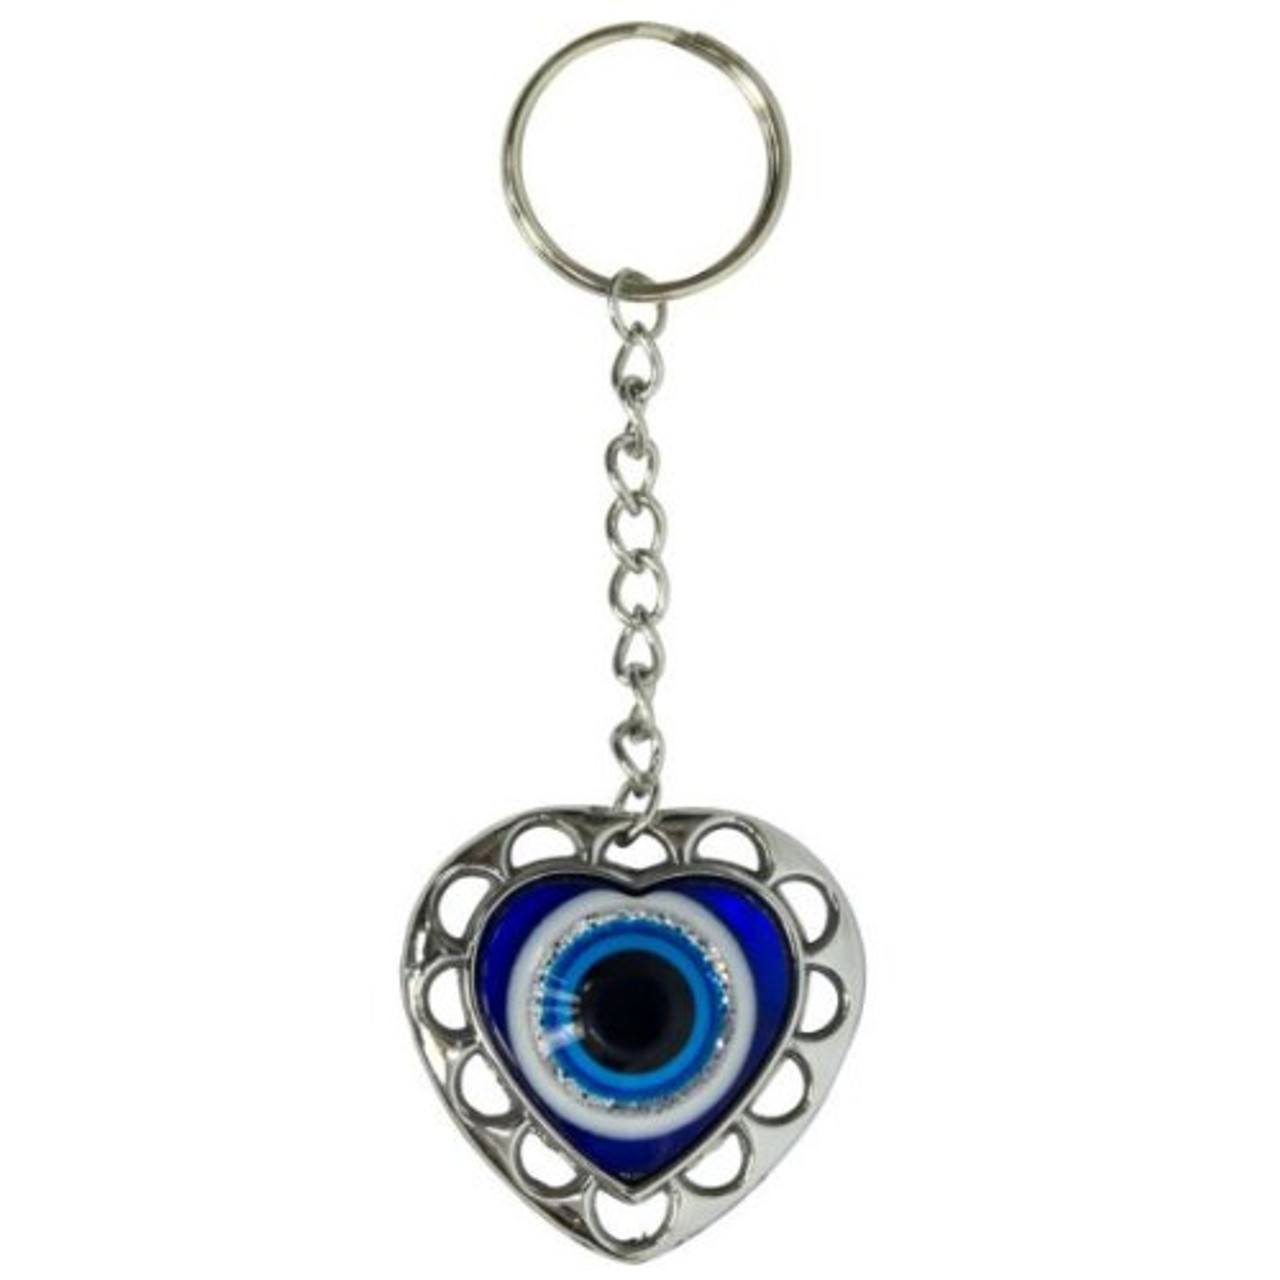 Evil Eye Key Ring Assorted Styles - Select